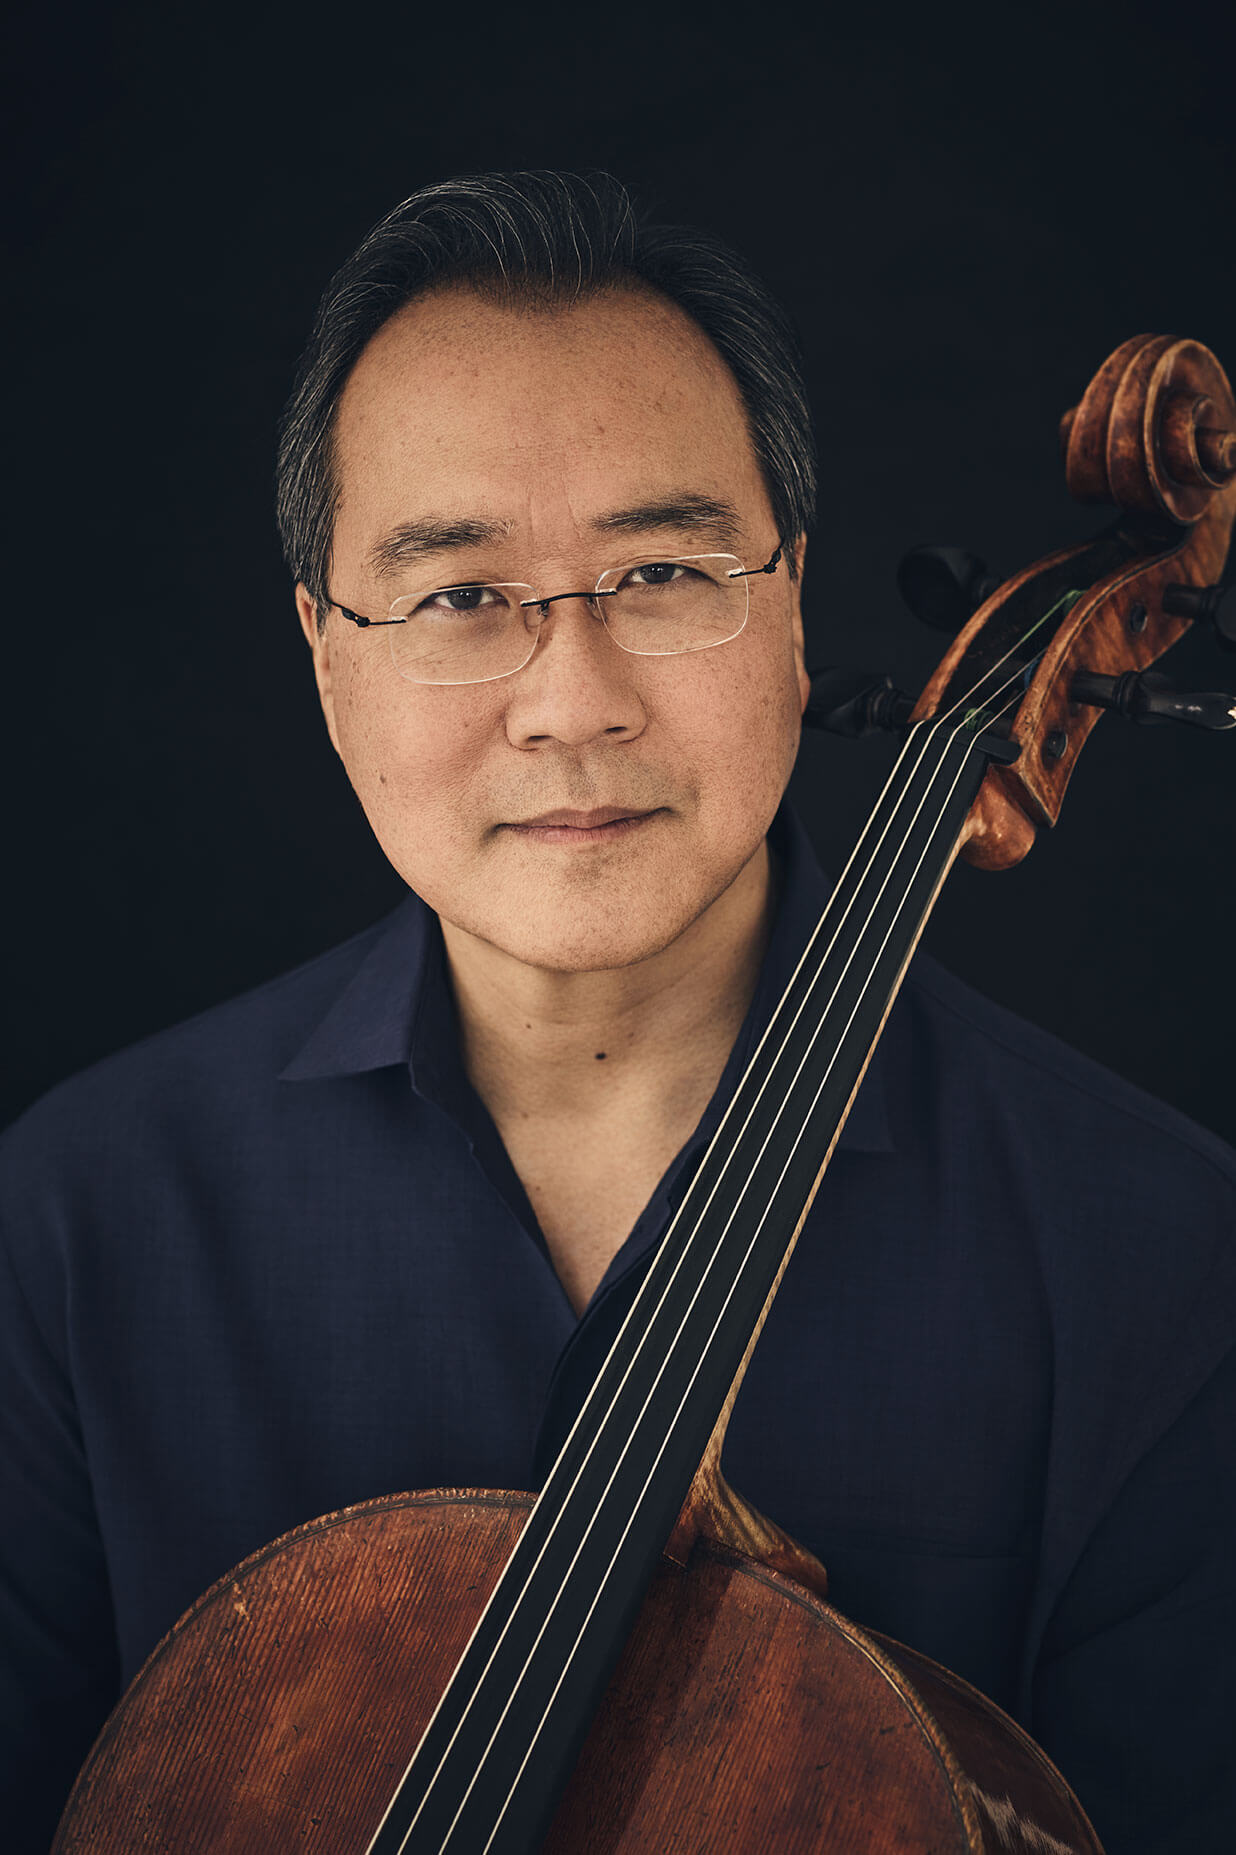 YoYo Ma Carnegie Foundation for the Advancement of Teaching